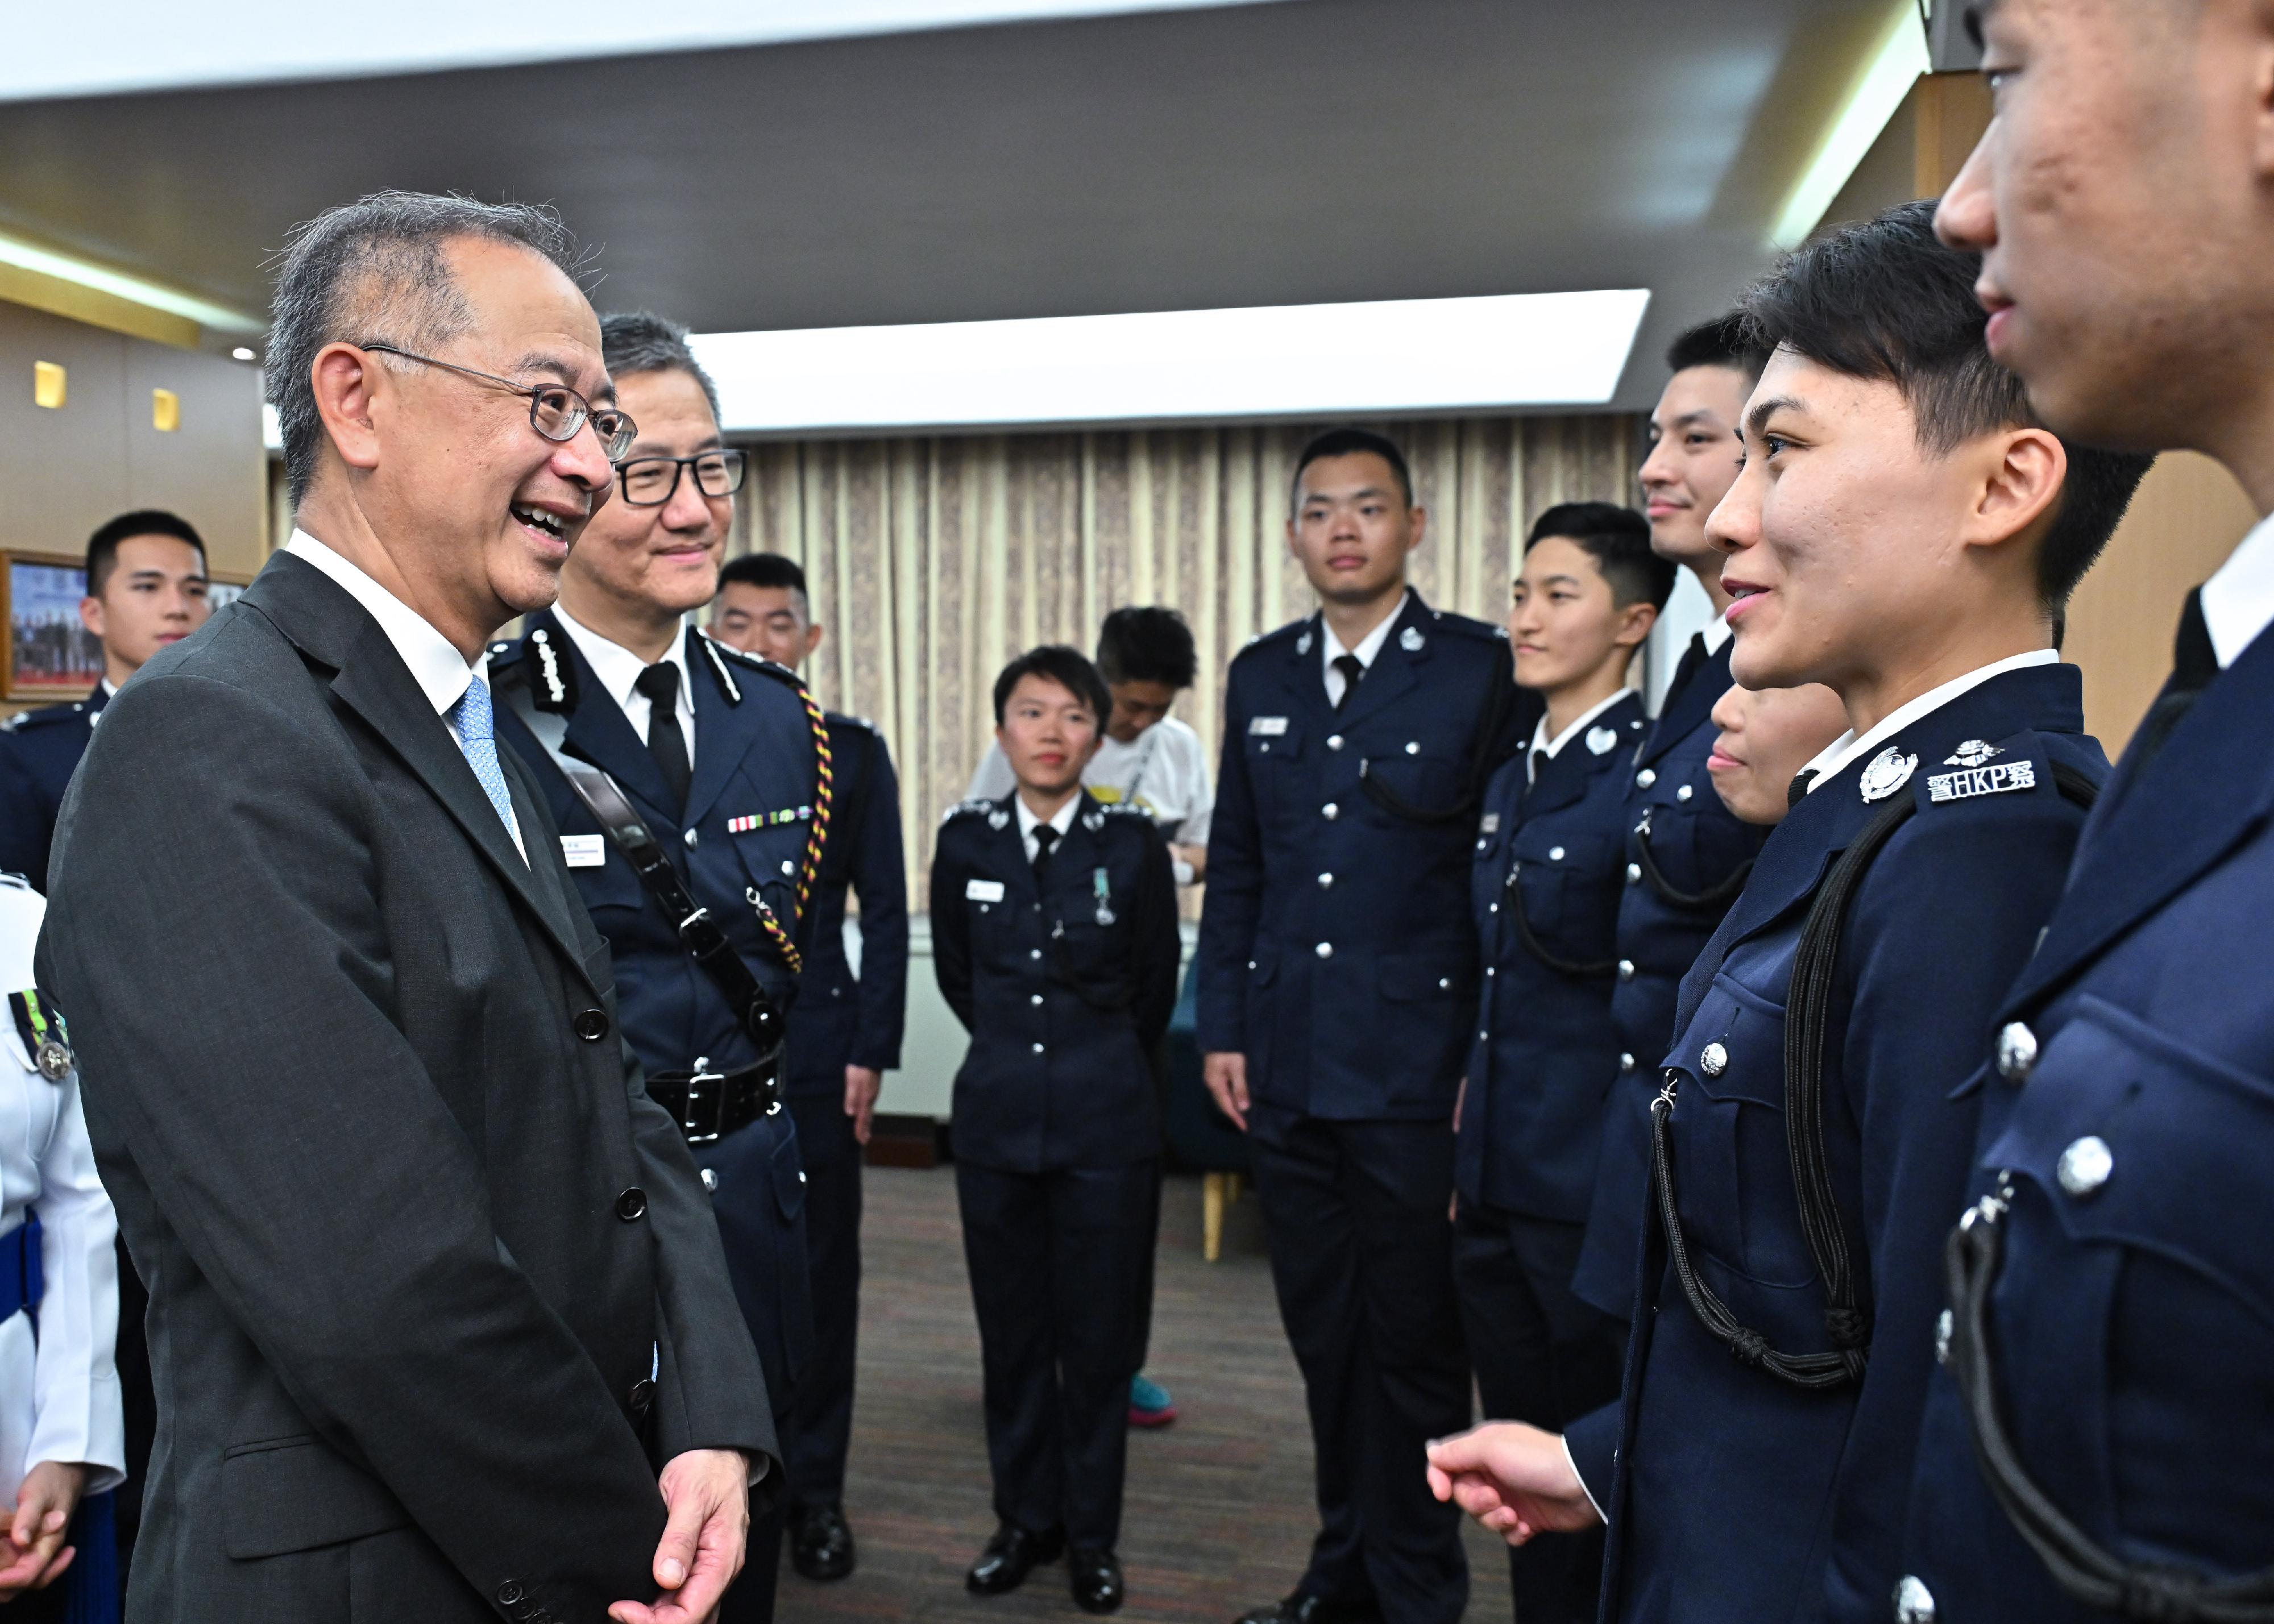 The Chief Executive of the Hong Kong Monetary Authority, Mr Eddie Yue Wai-man (first left), and the Commissioner of Police, Mr Siu Chak-yee (second left) congratulate the probationary inspectors after the passing-out parade held at the Hong Kong Police College today (April 27).